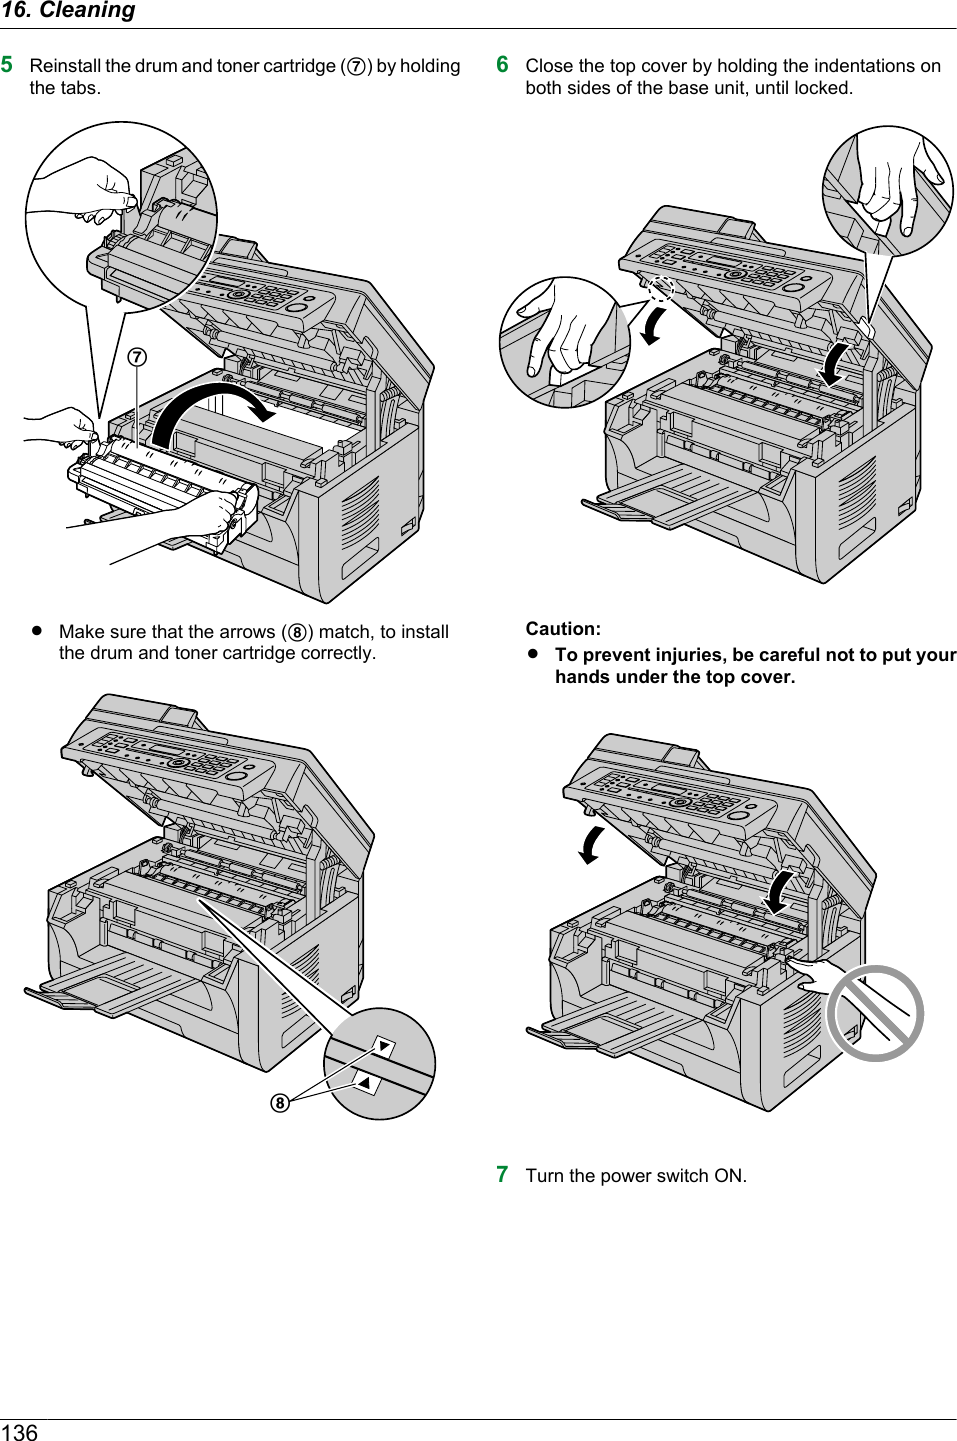 5Reinstall the drum and toner cartridge (G) by holdingthe tabs.GRMake sure that the arrows (H) match, to installthe drum and toner cartridge correctly.H6Close the top cover by holding the indentations onboth sides of the base unit, until locked.Caution:RTo prevent injuries, be careful not to put yourhands under the top cover.7Turn the power switch ON.13616. Cleaning